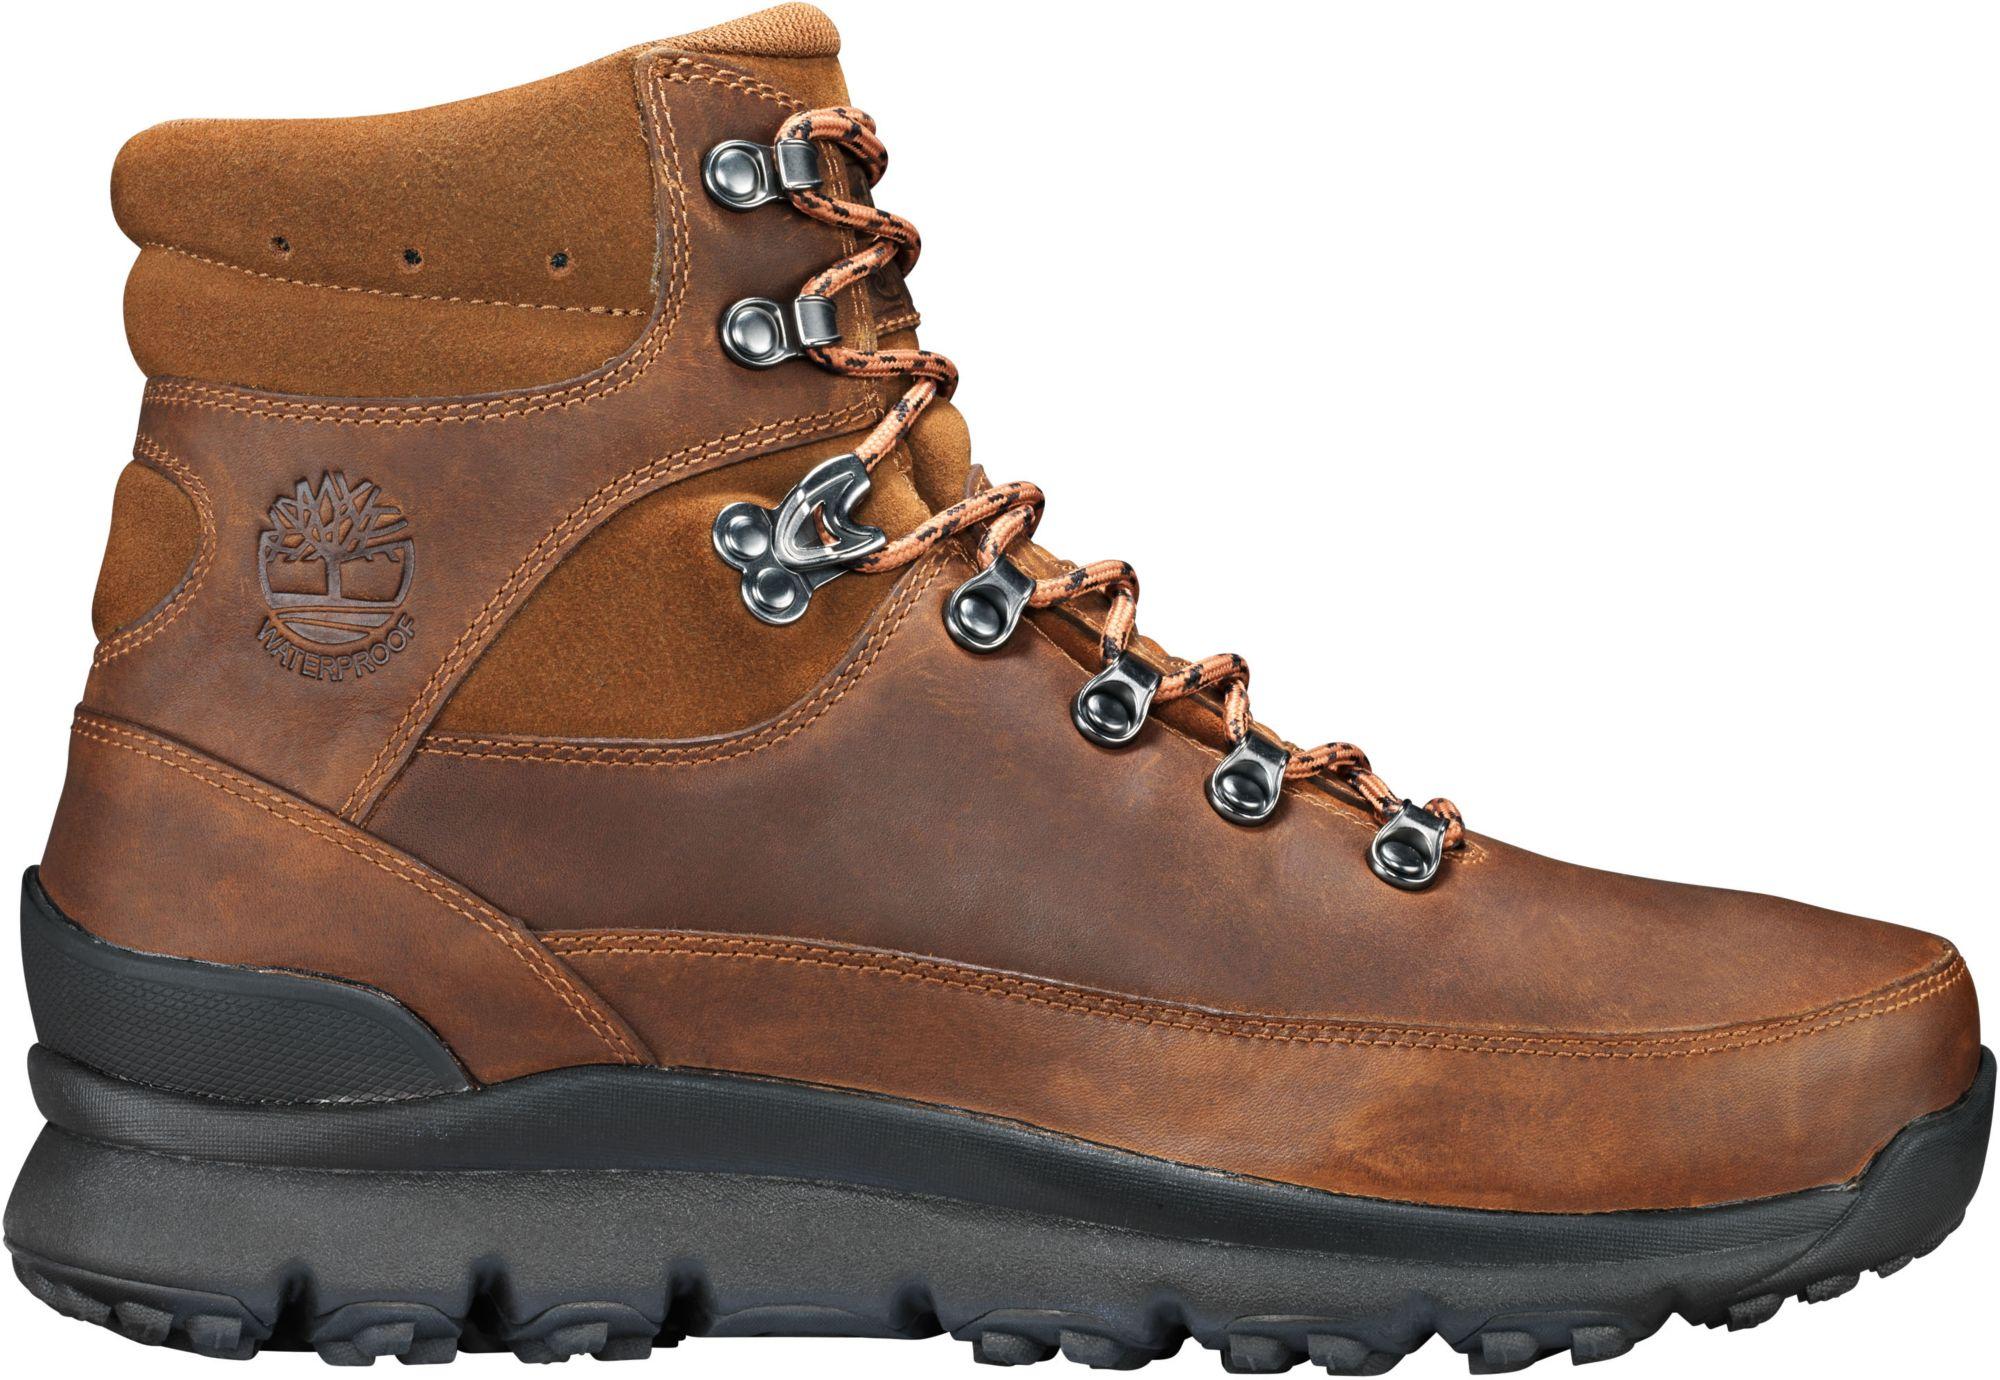 Timberland World Hiker Mid Waterproof Hiking Boots in 